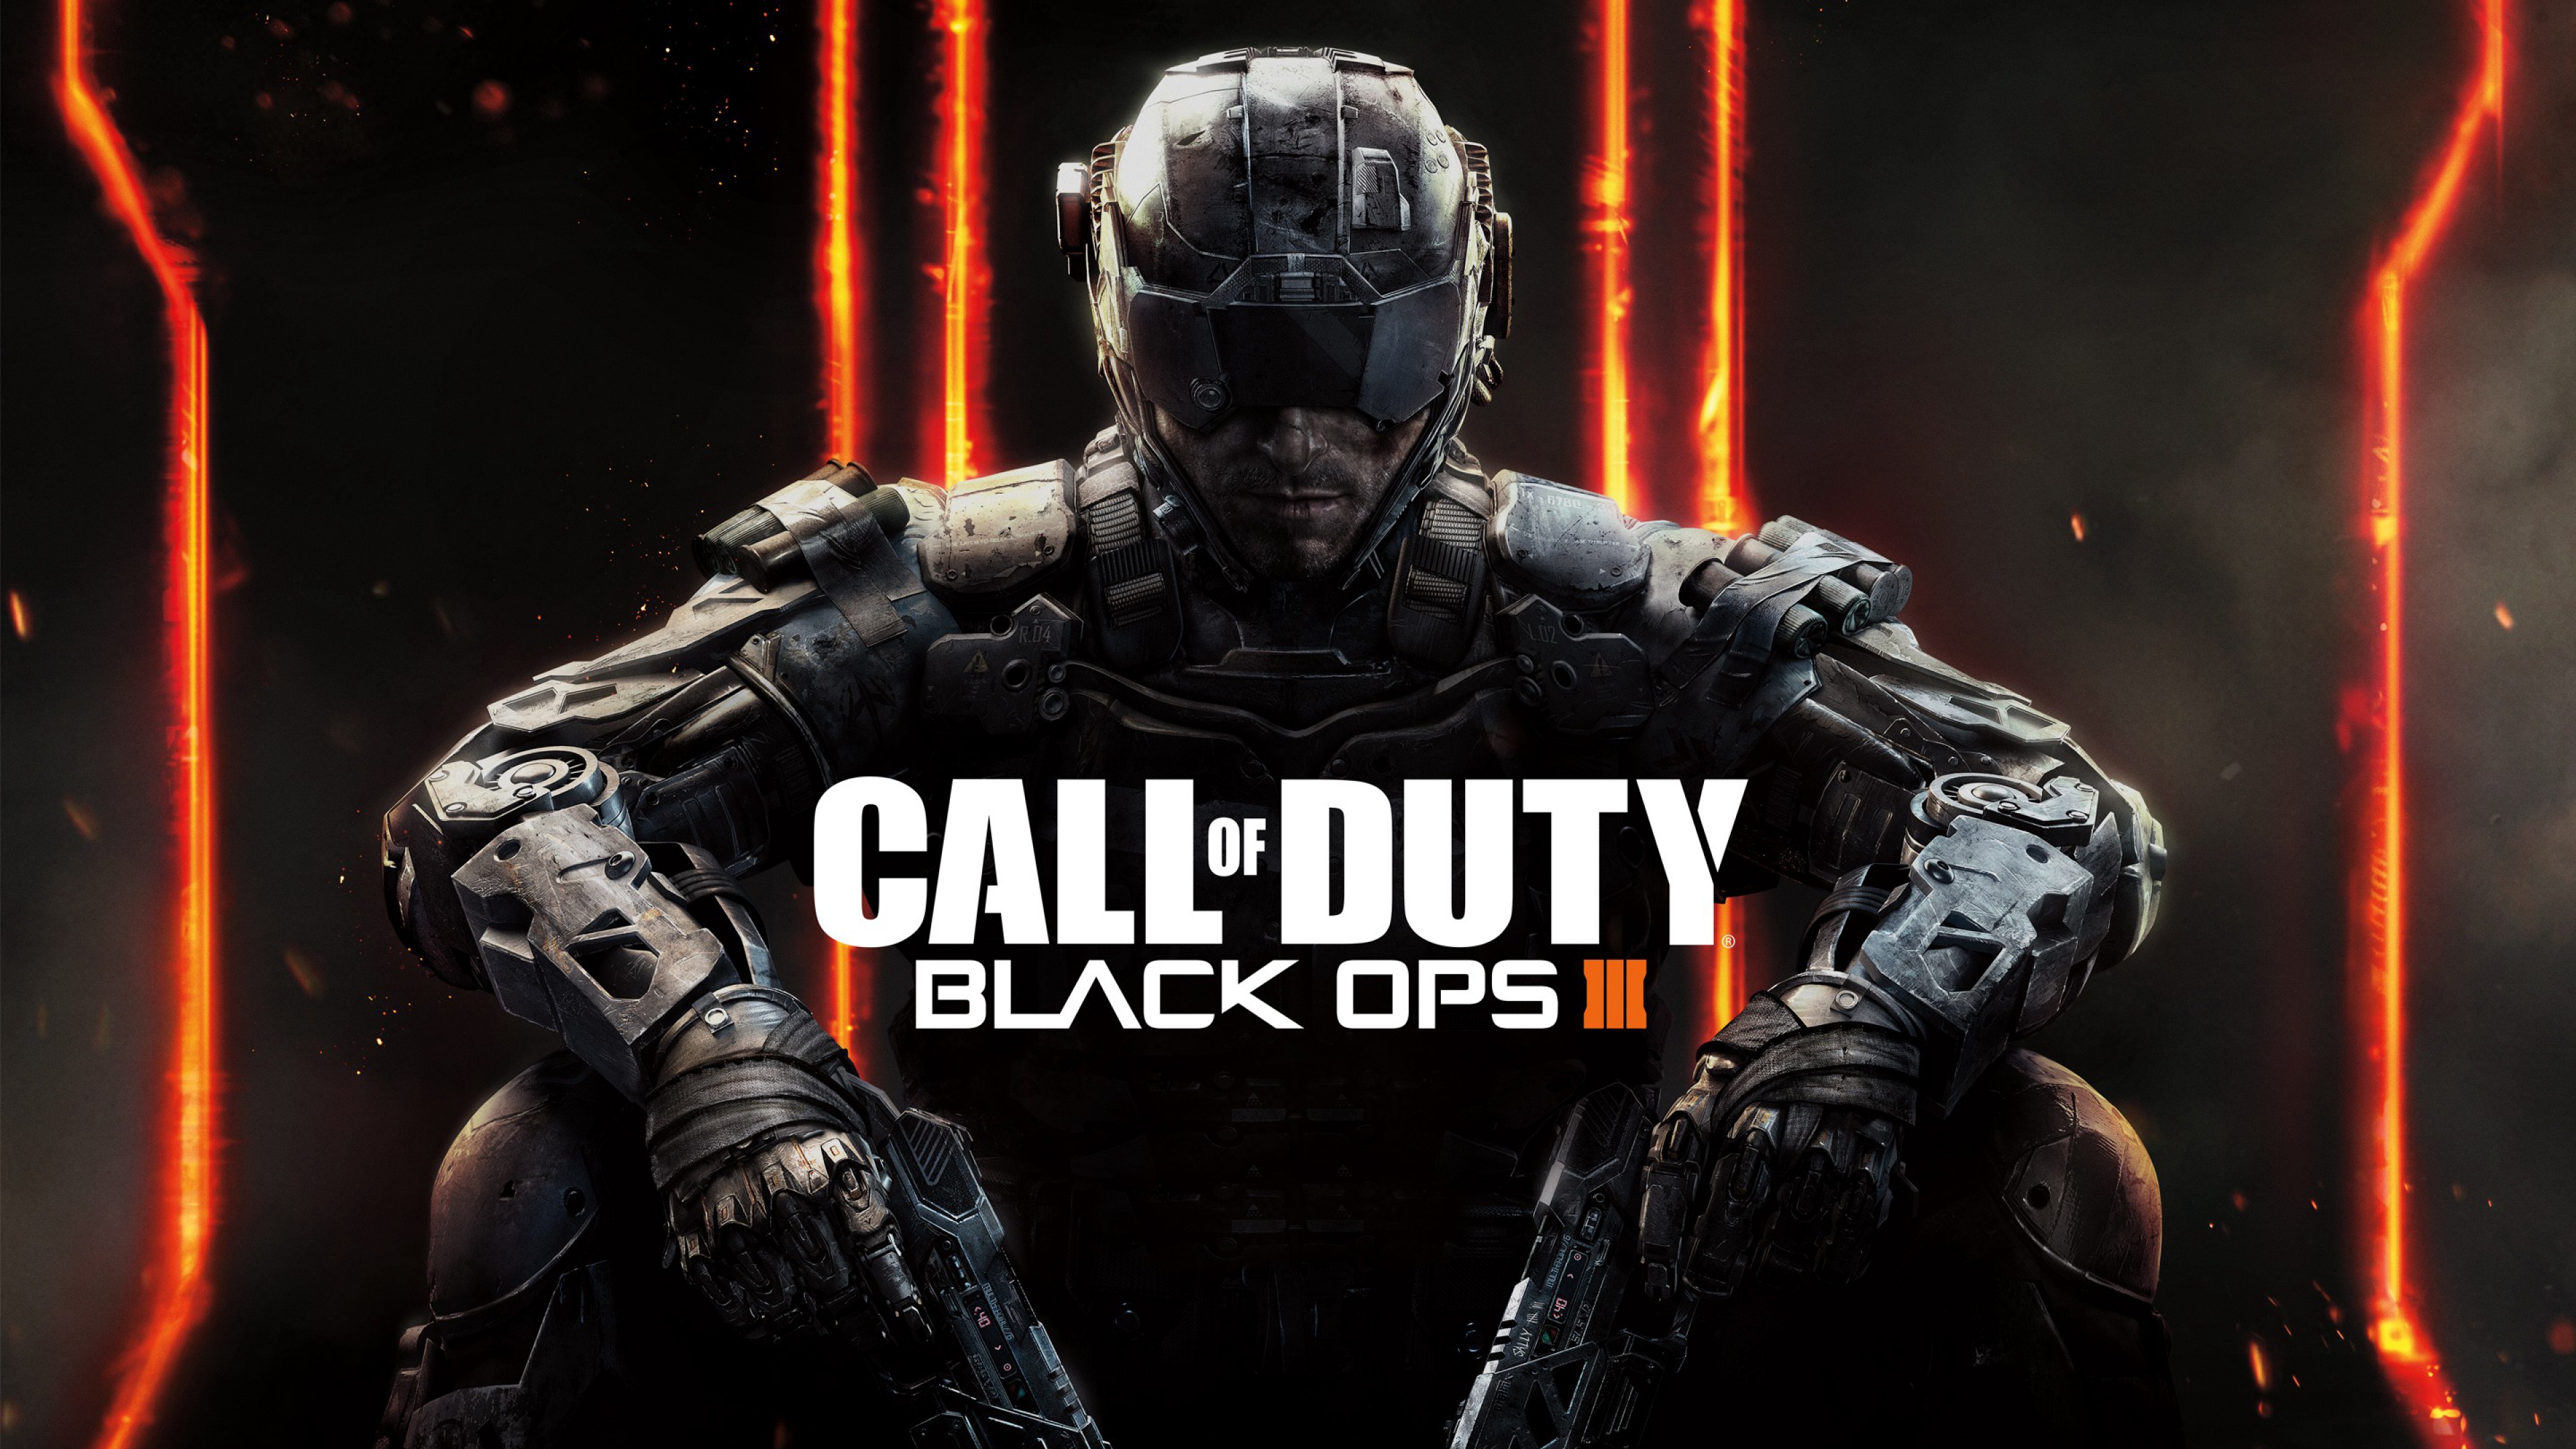 Call of duty black ops background